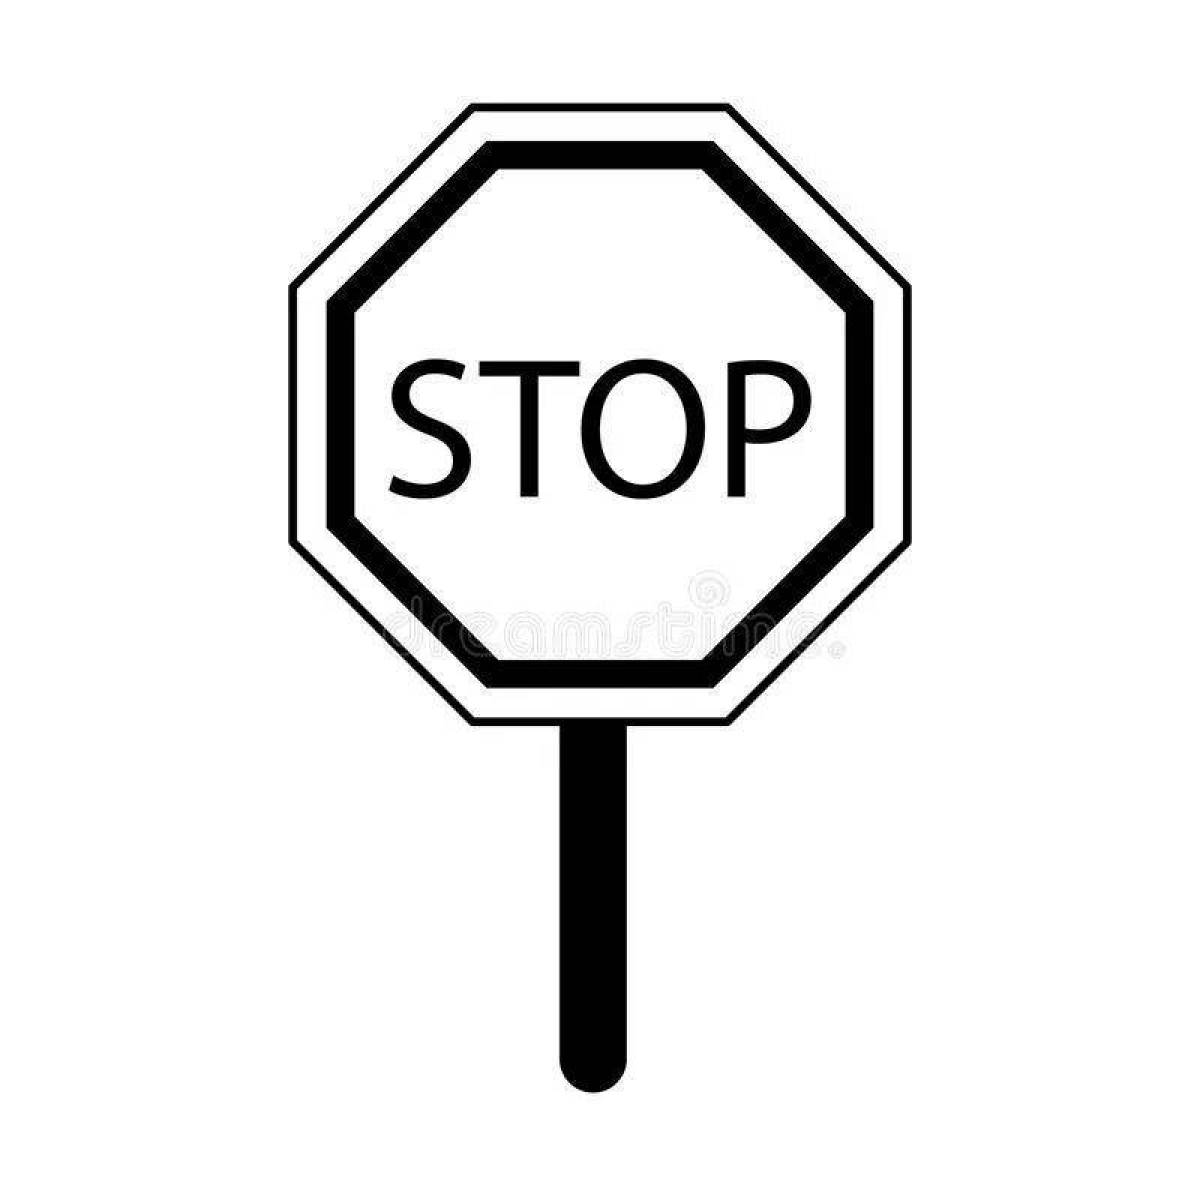 Coloring page cheerful stop sign